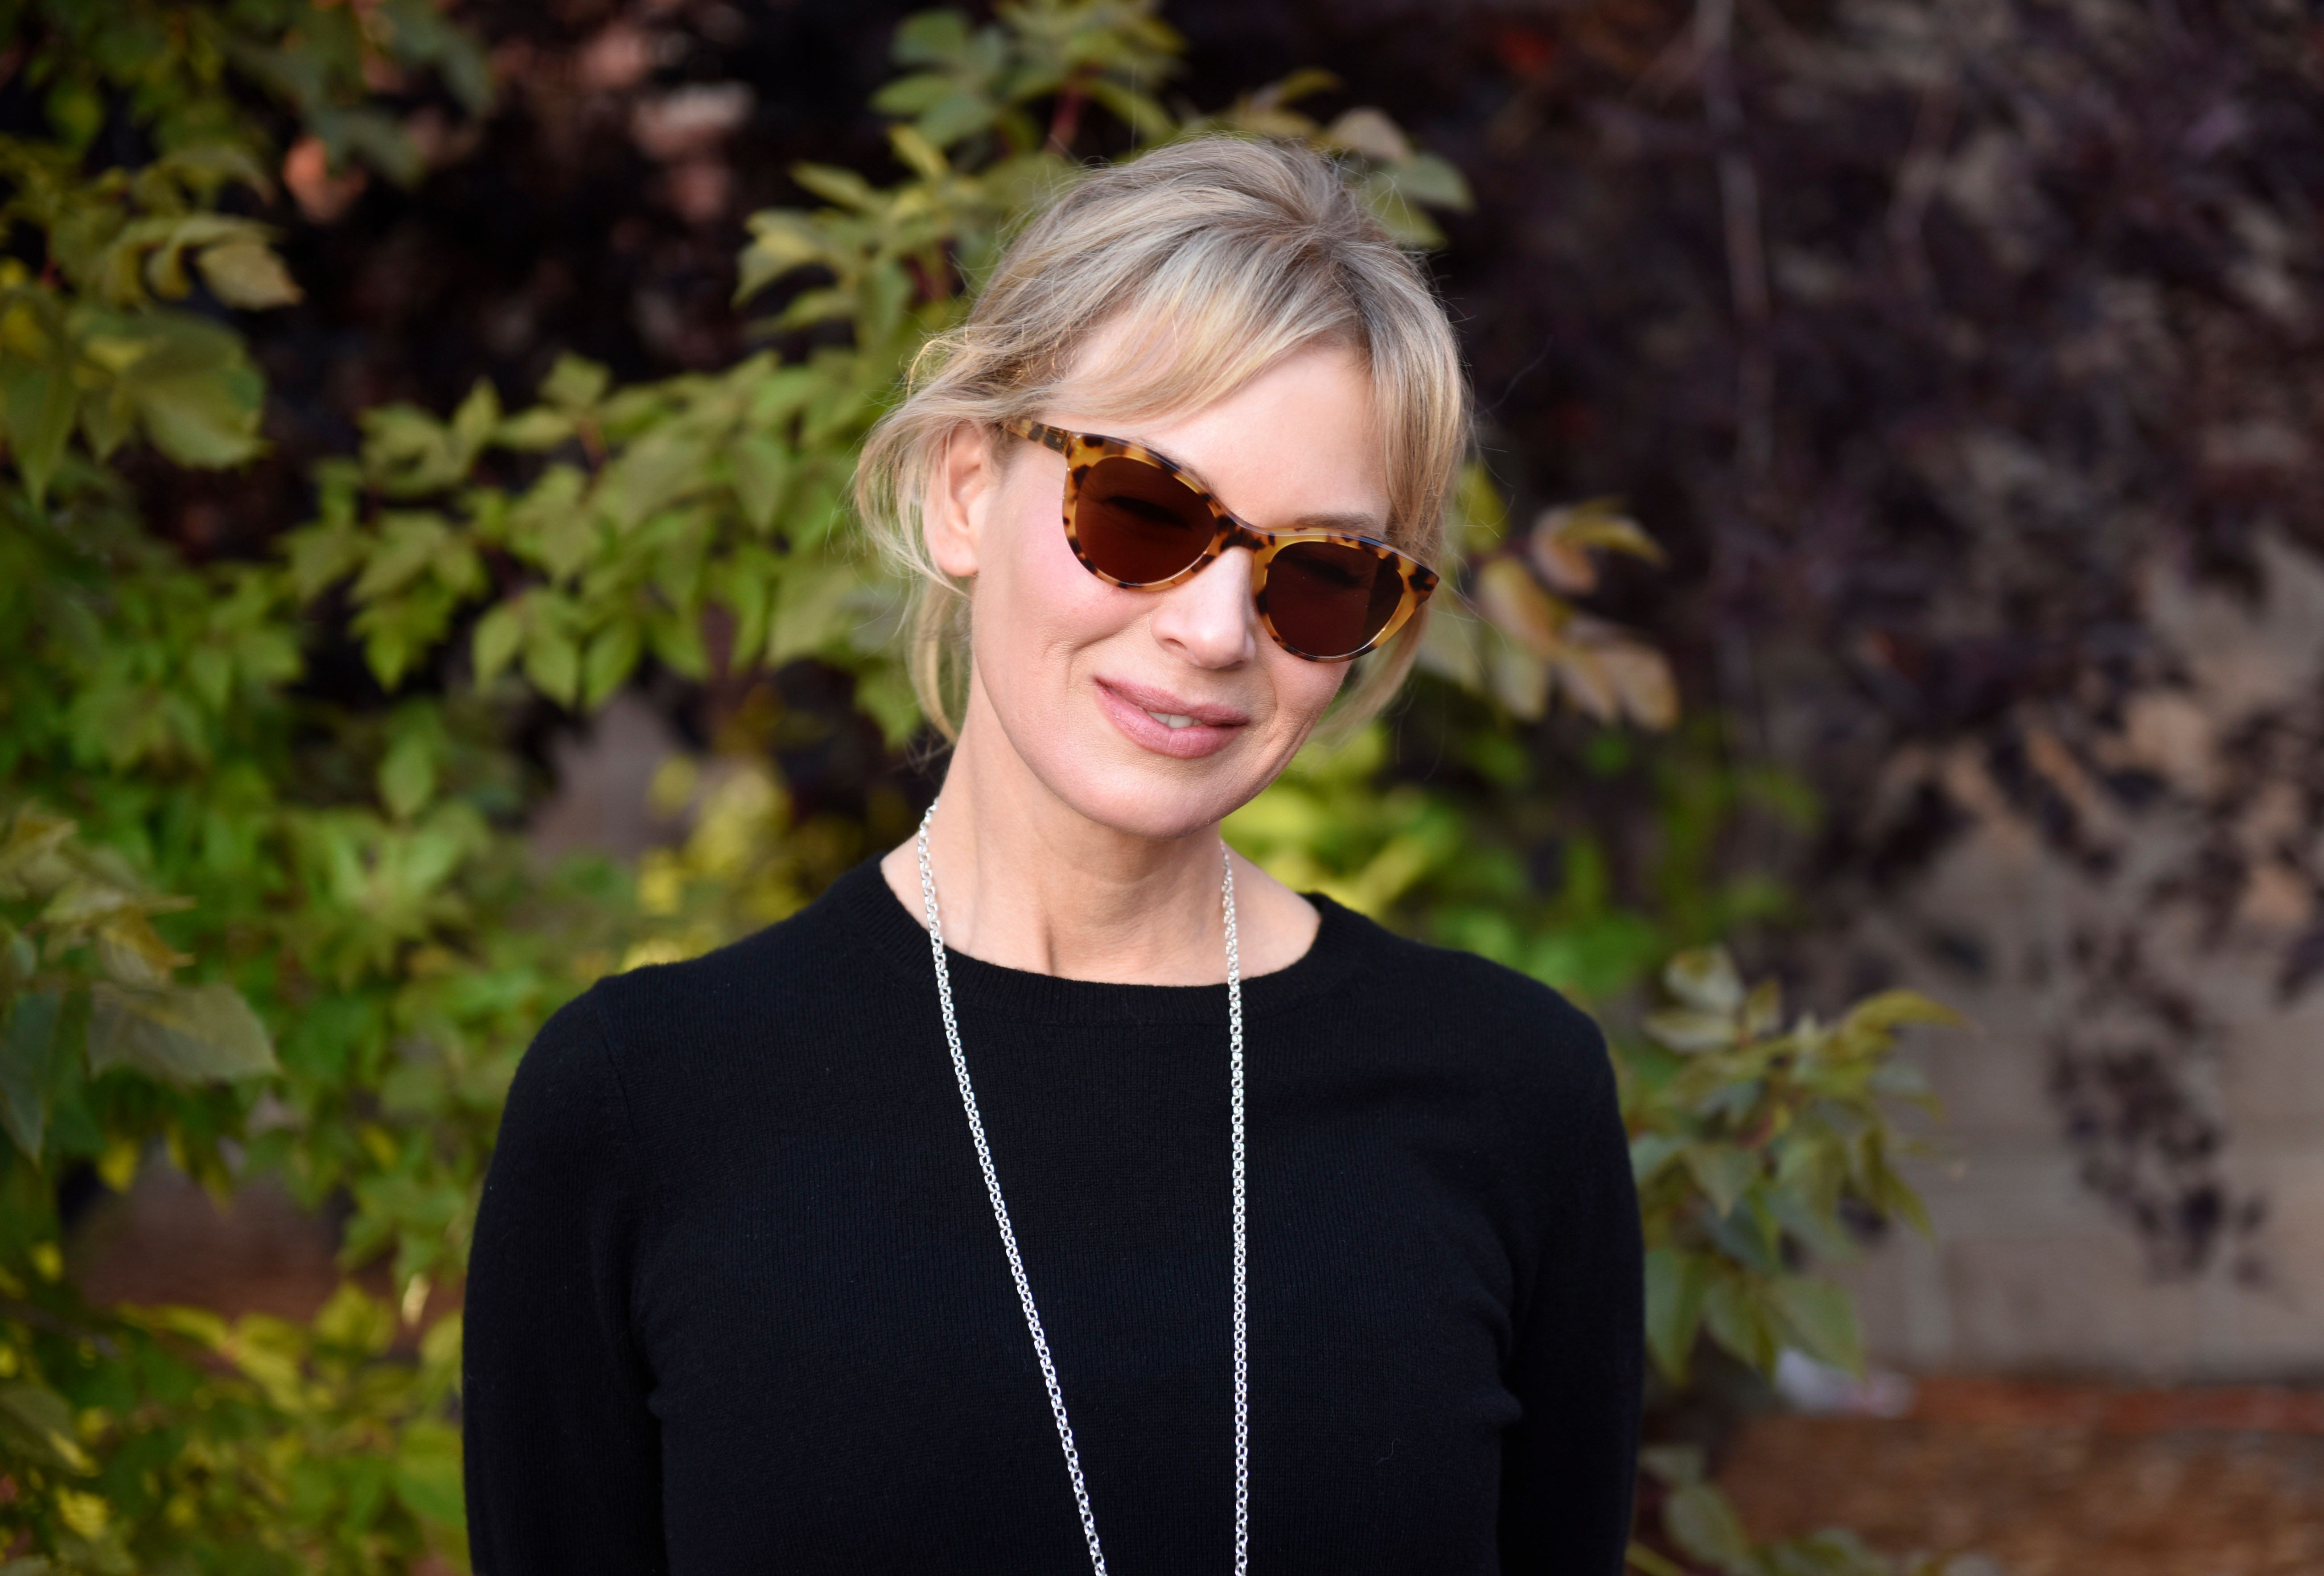 Renee Zellweger at the Telluride Film Festival 2019 on August 30, 2019 | Photo: Getty Images